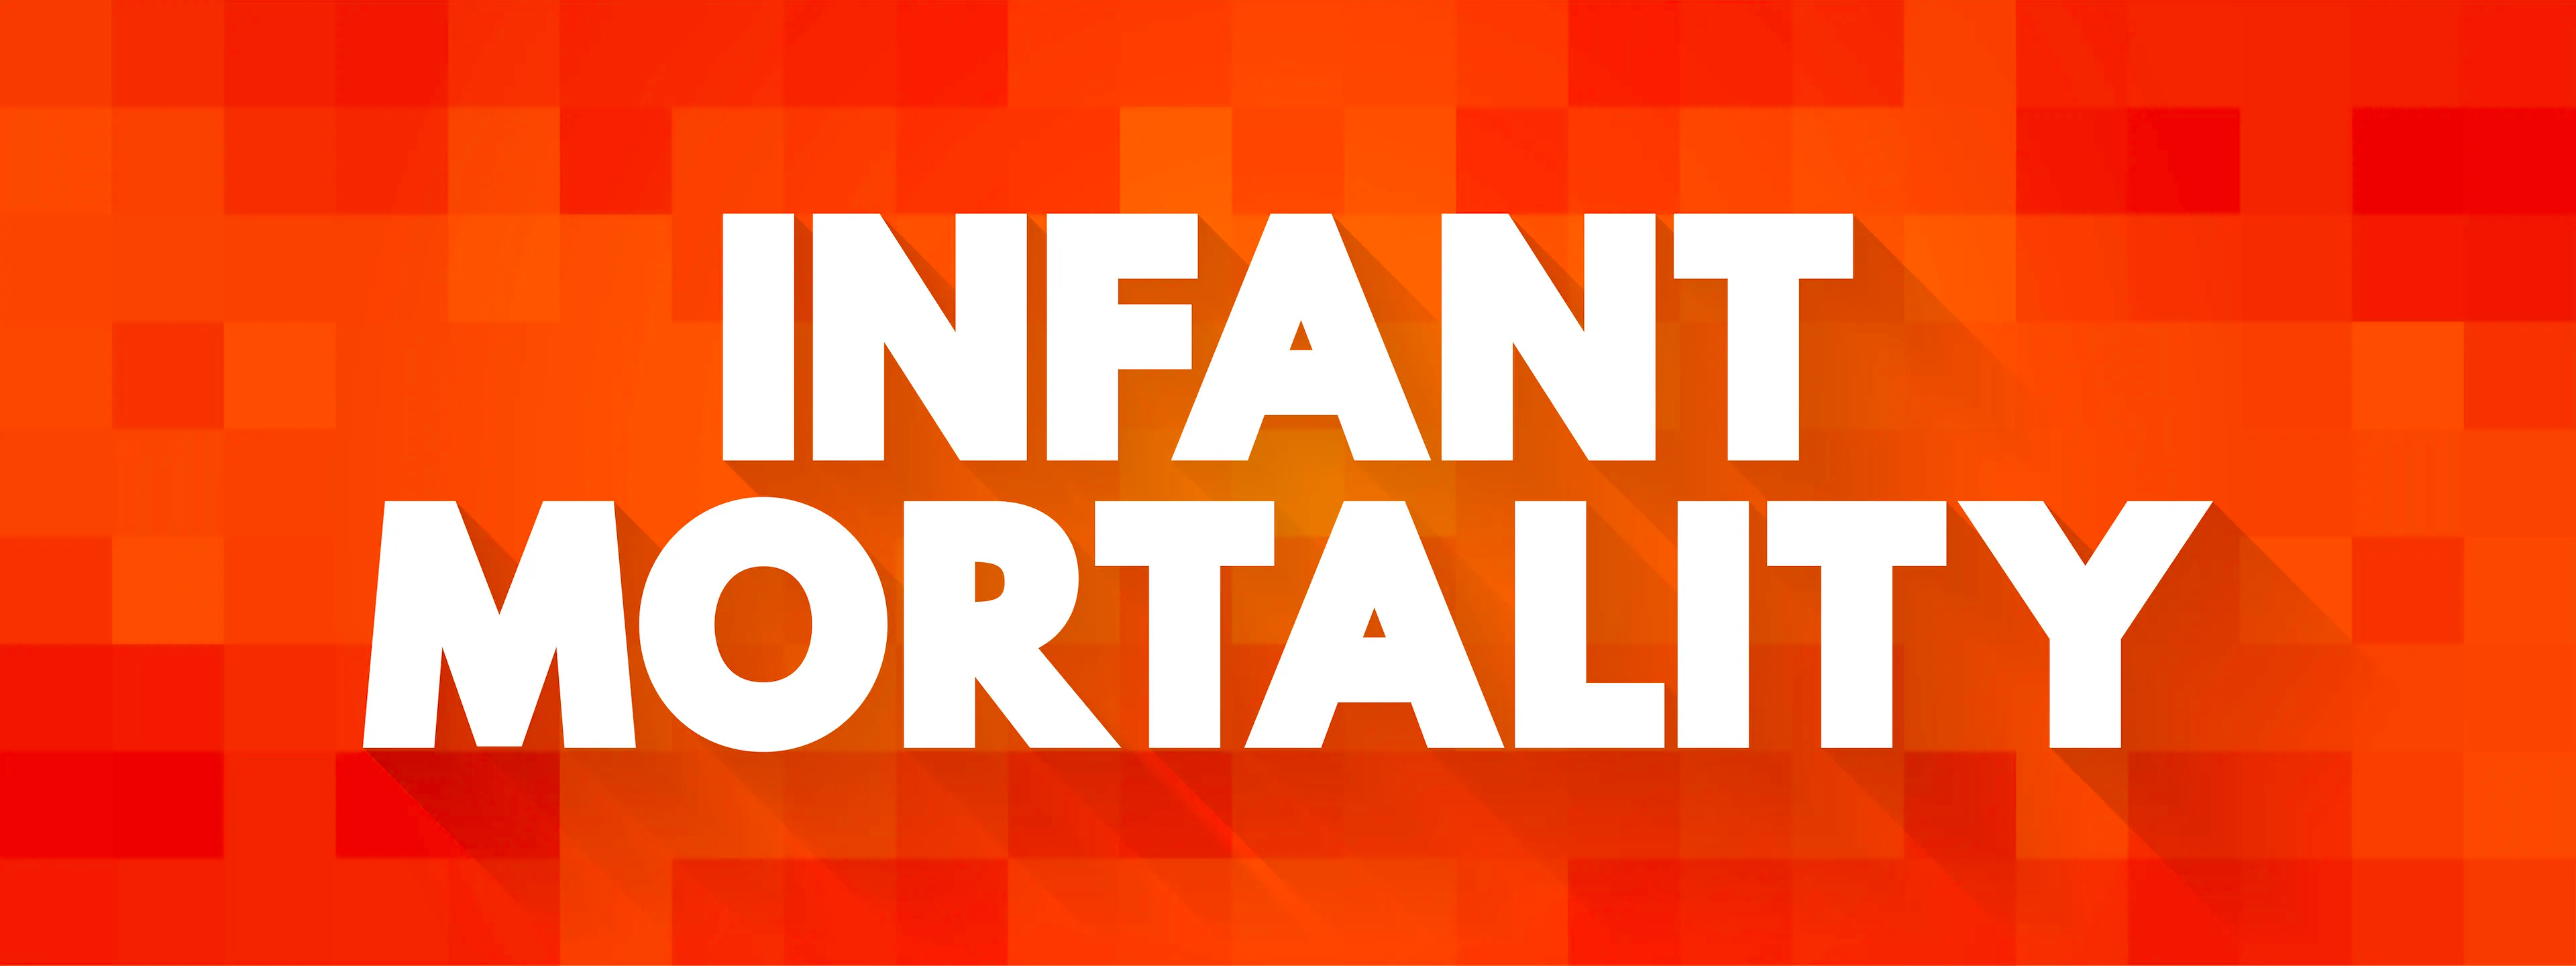 Infant mortality rate sees first year-to-year increase in 2 decades | Image Credit: © dizain - © dizain - stock.adobe.com.